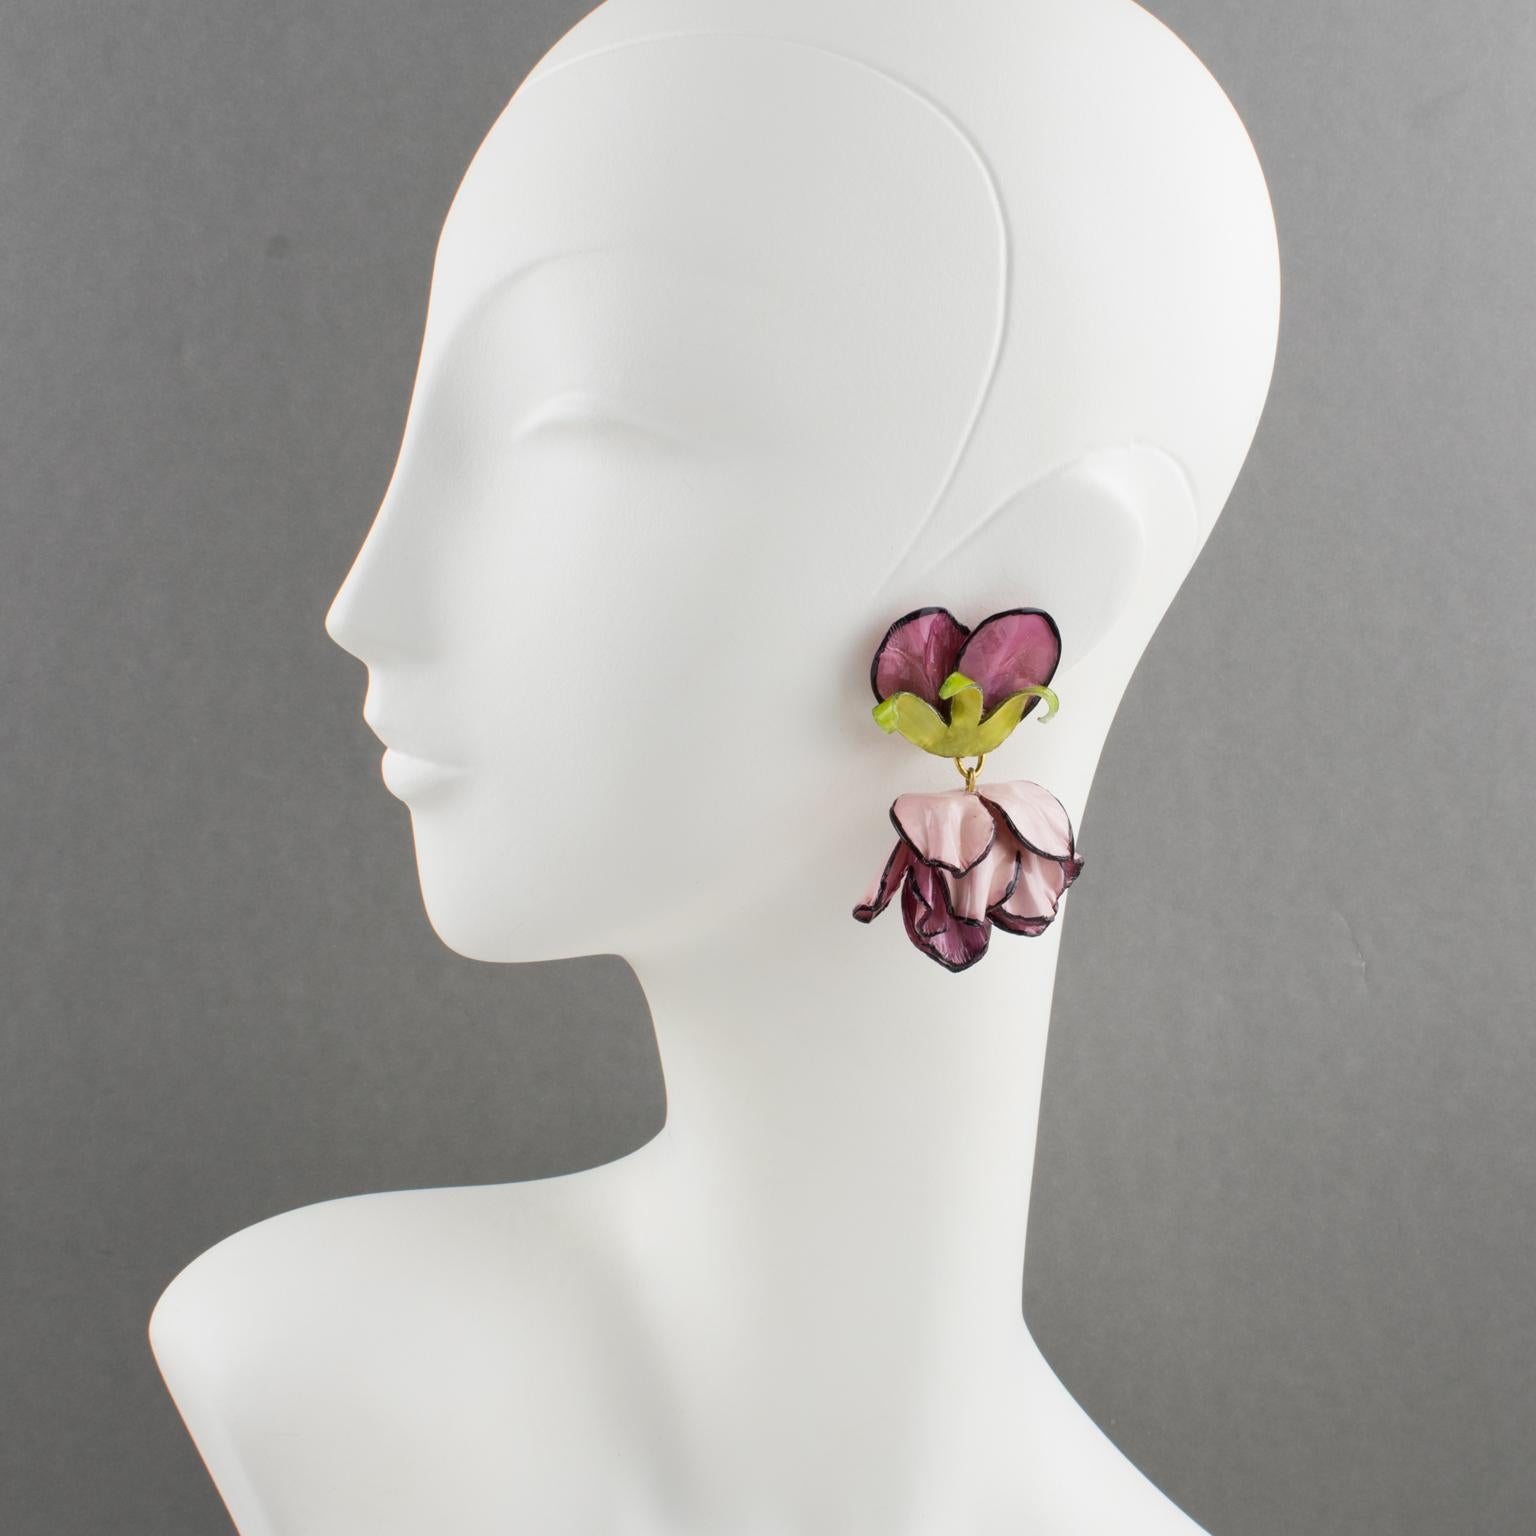 These charming Francoise Montague, Paris dimensional dangling clip-on earrings were designed by Cilea Paris. The floral-inspired hand-made artisanal resin earrings feature poppy flowers with leaves, with textured patterns built together to form a